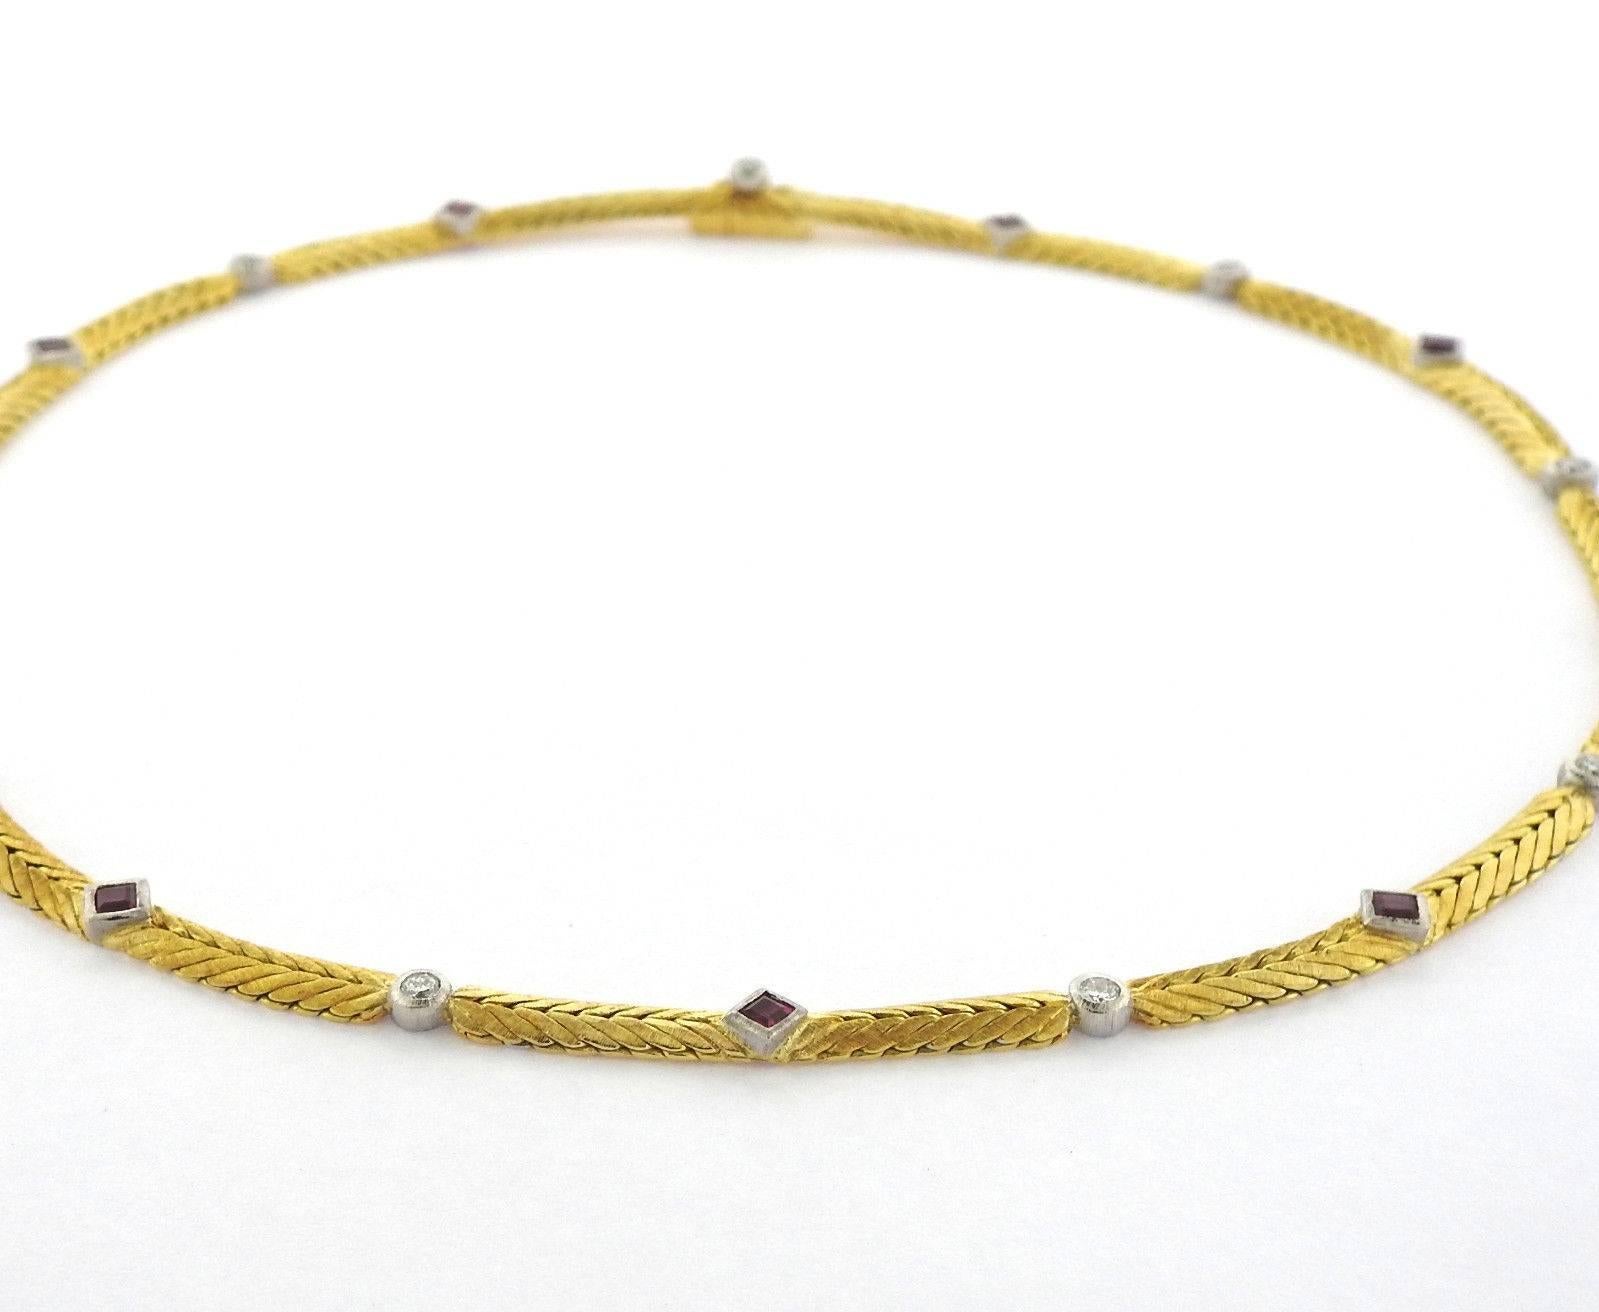 An 18k yellow and white gold necklace set with 0.59ctw of rubies and 0.45ctw of H/VS diamonds.  The necklace is 14 1/2